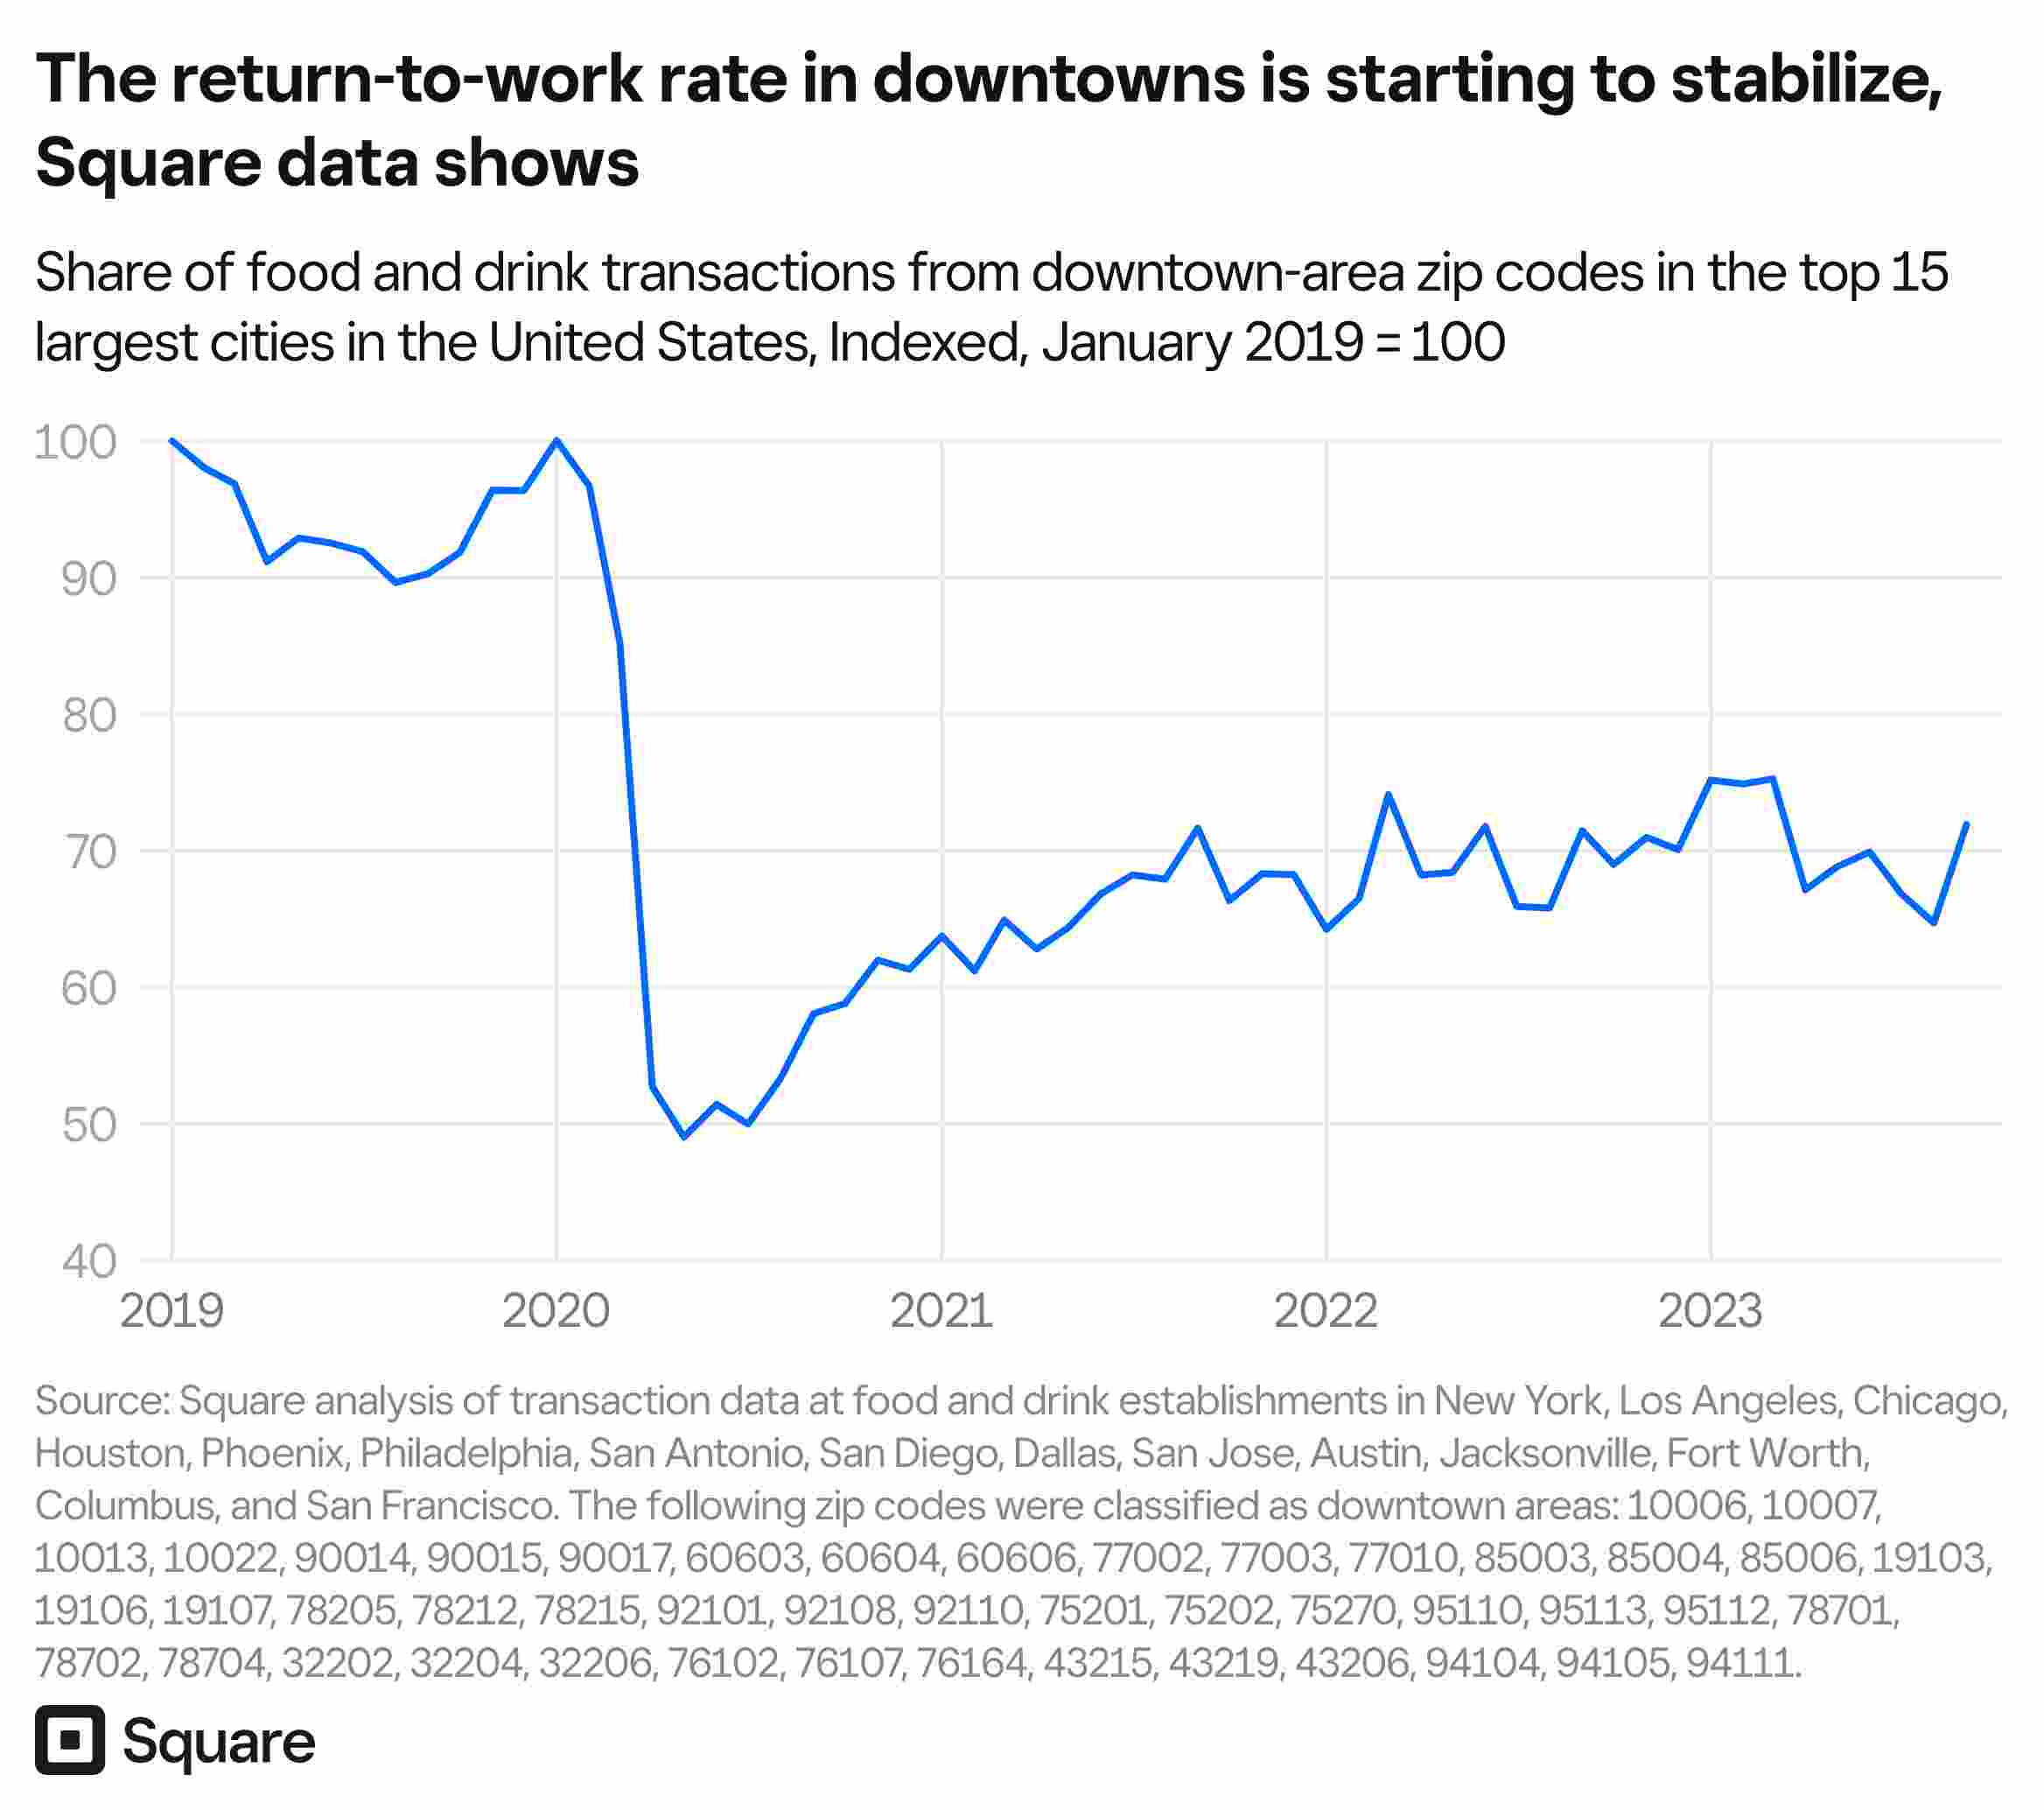 Square-the-return-to-work-rate-in-downtowns-is-starting-to-stabilize-square-data-shows-compressed